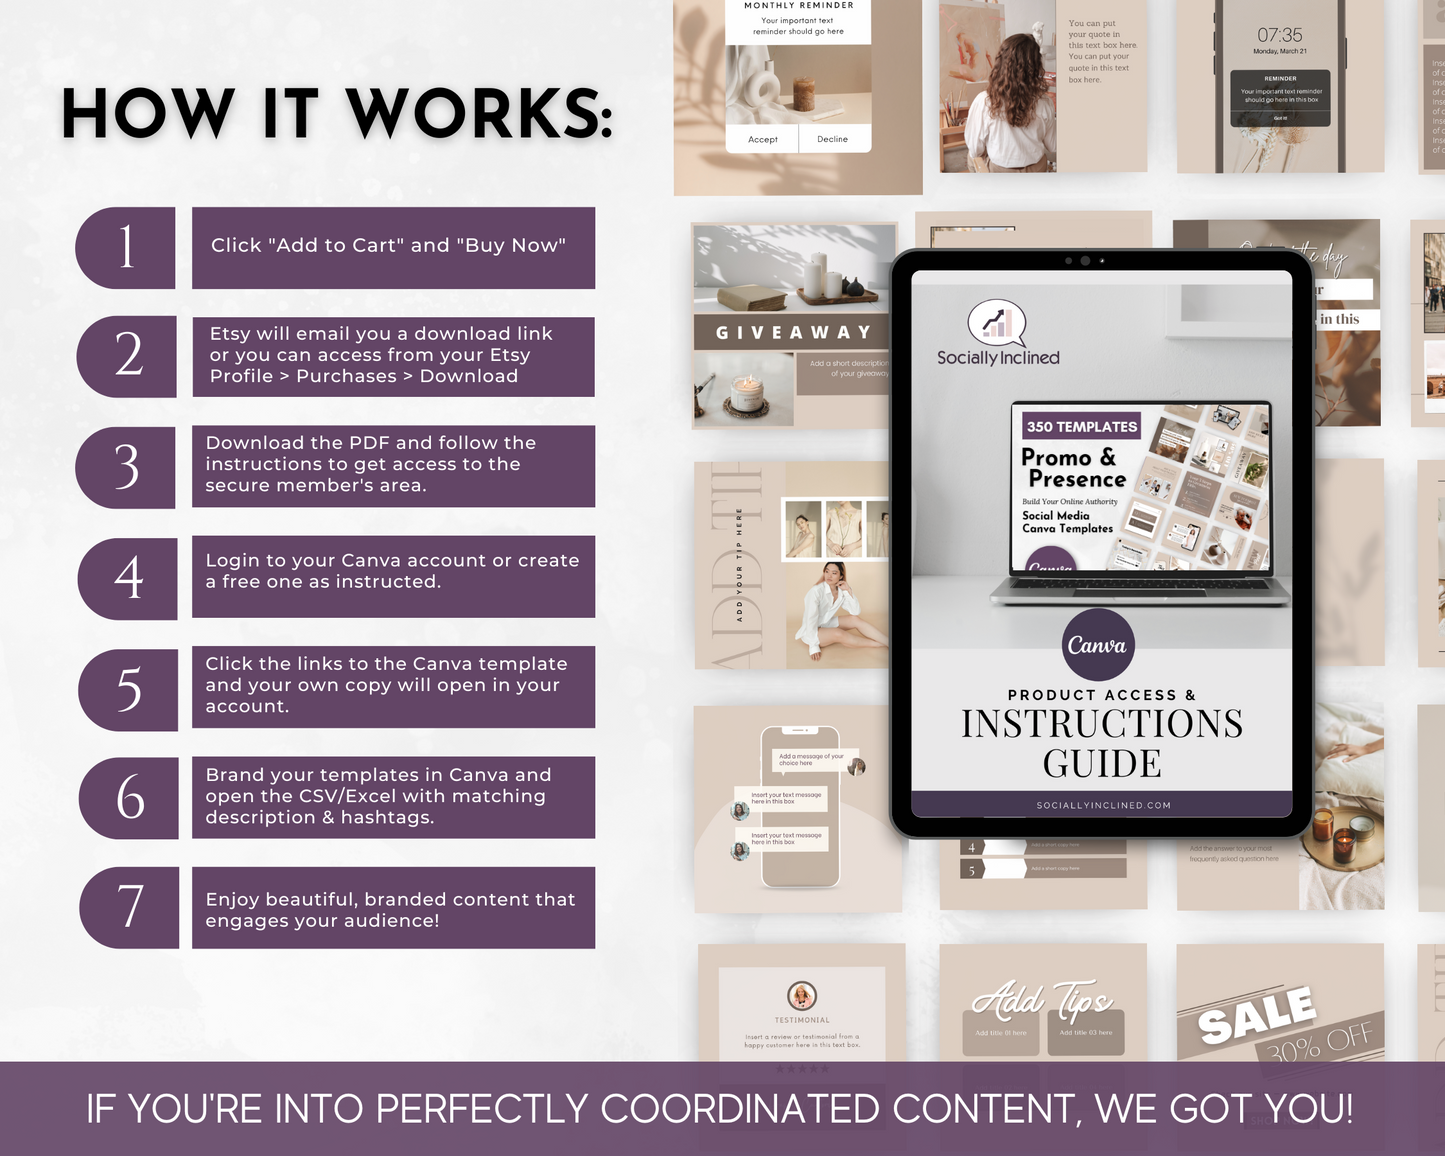 Instruction guide for optimizing content and enhancing social media presence using the Promo & Presence Social Media Post Bundle with Canva Templates by Socially Inclined.